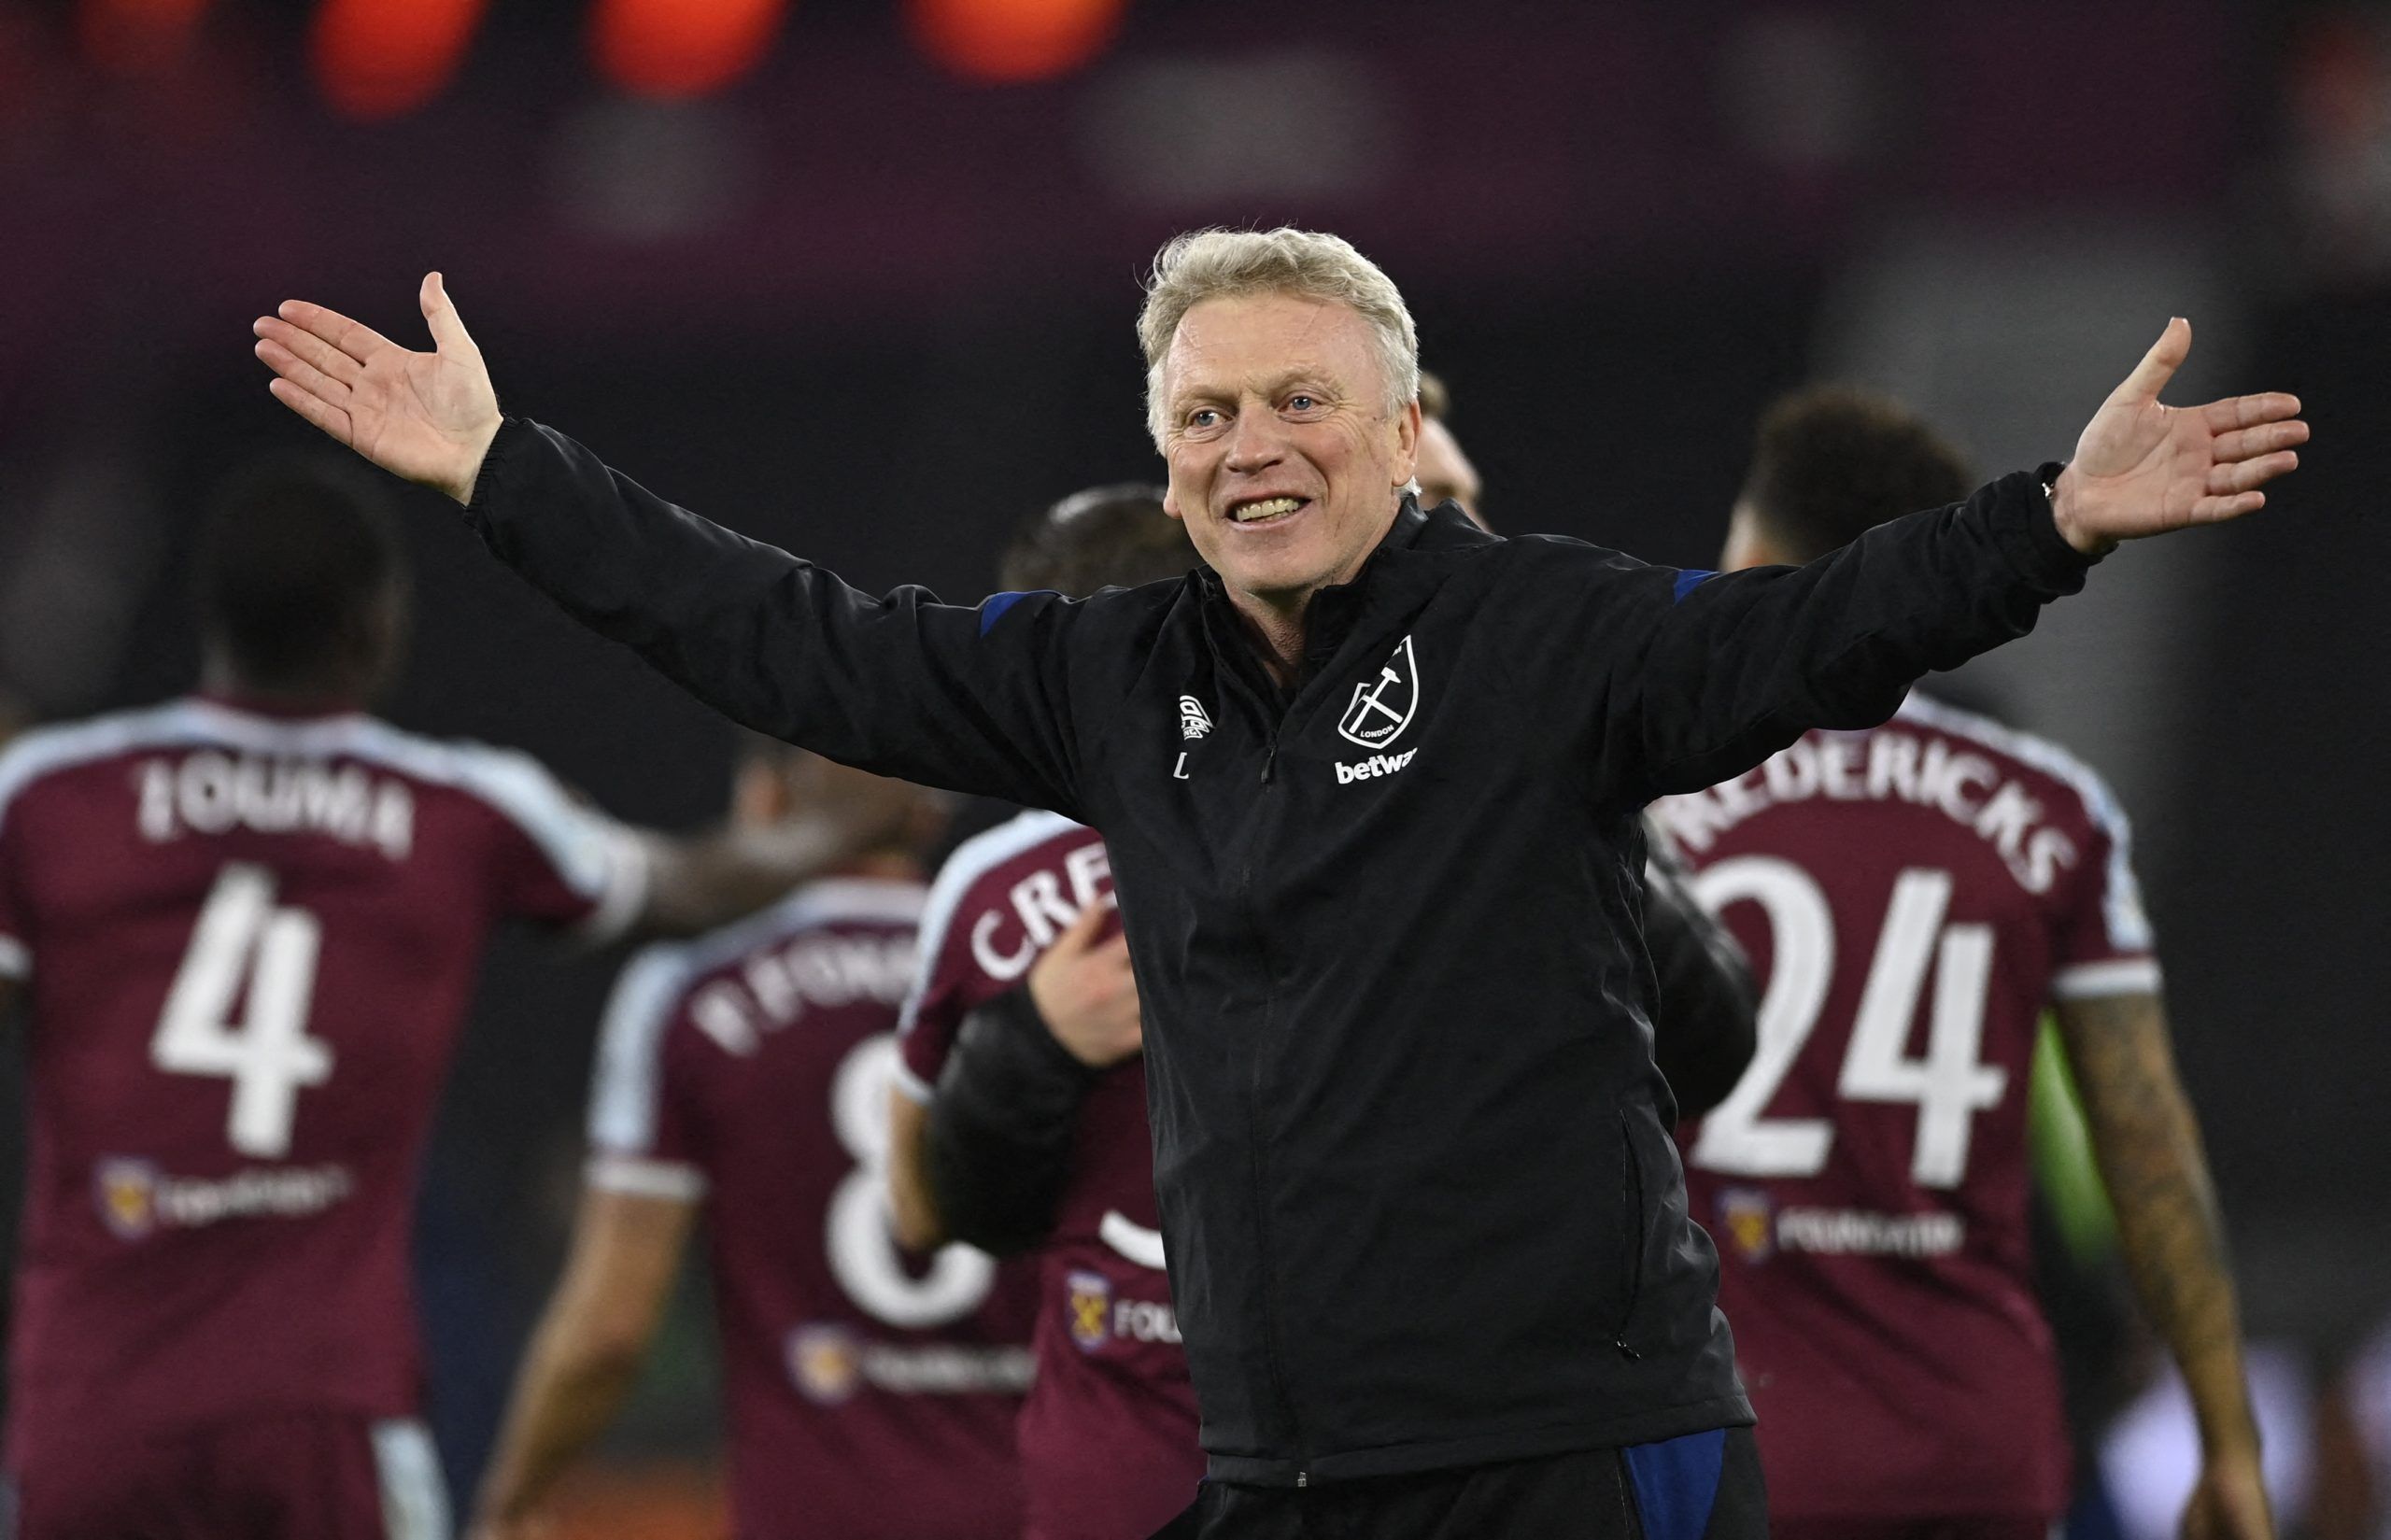 Soccer Football - Europa League - Round of 16 Second Leg - West Ham United v Sevilla - London Stadium, London, Britain - March 17, 2022  West Ham United manager David Moyes celebrates after the match REUTERS/Tony Obrien